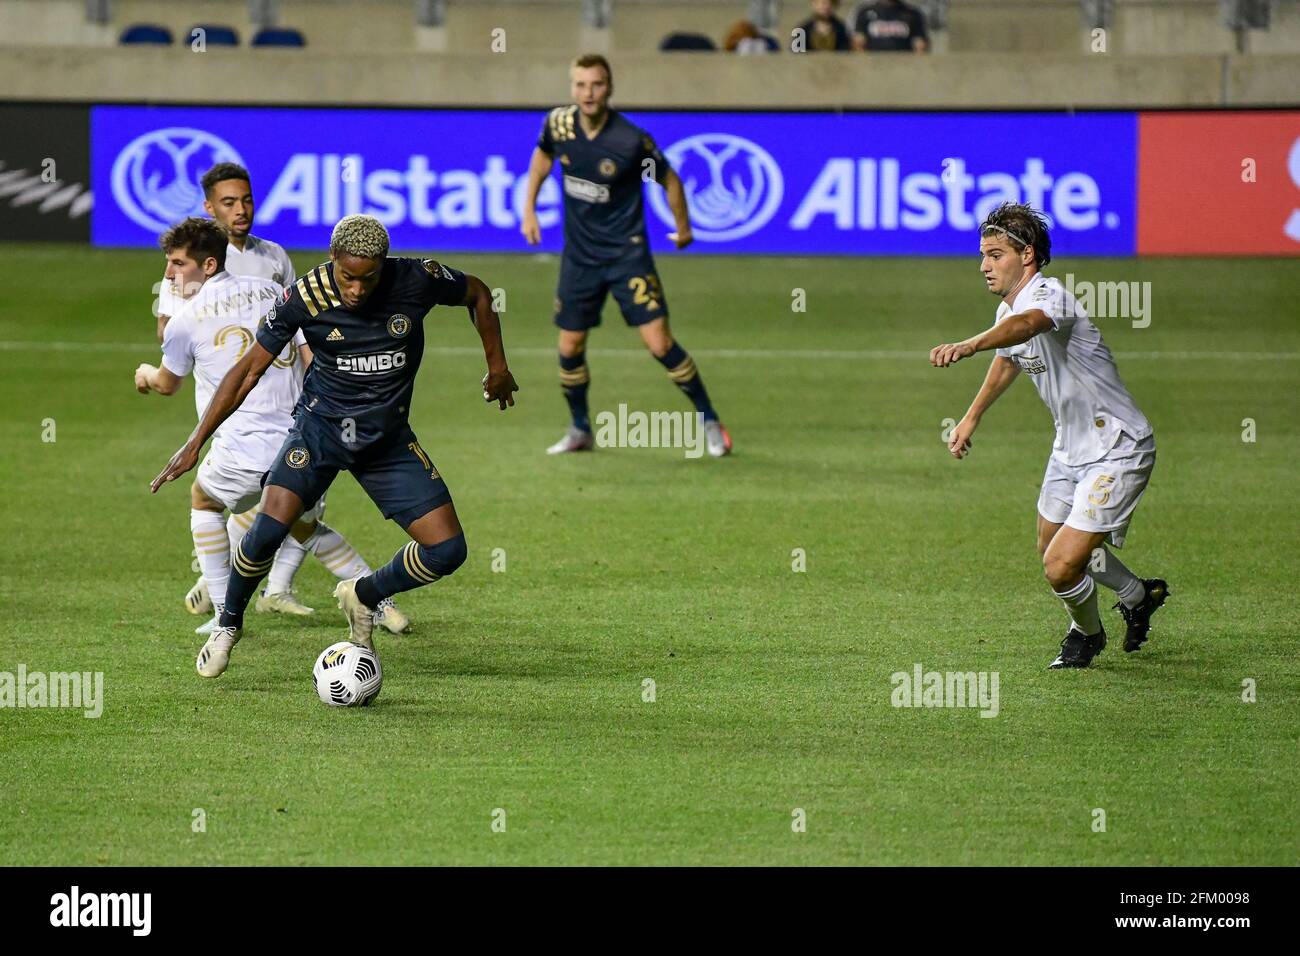 Philadelphia, PA, USA - 4th, May, 2021 - during a 1-1 2nd leg tie. the Philadelphia Union advance to the semi-finals with a 4-1 aggregate score. Credit: Don Mennig/Alamy Live News Stock Photo